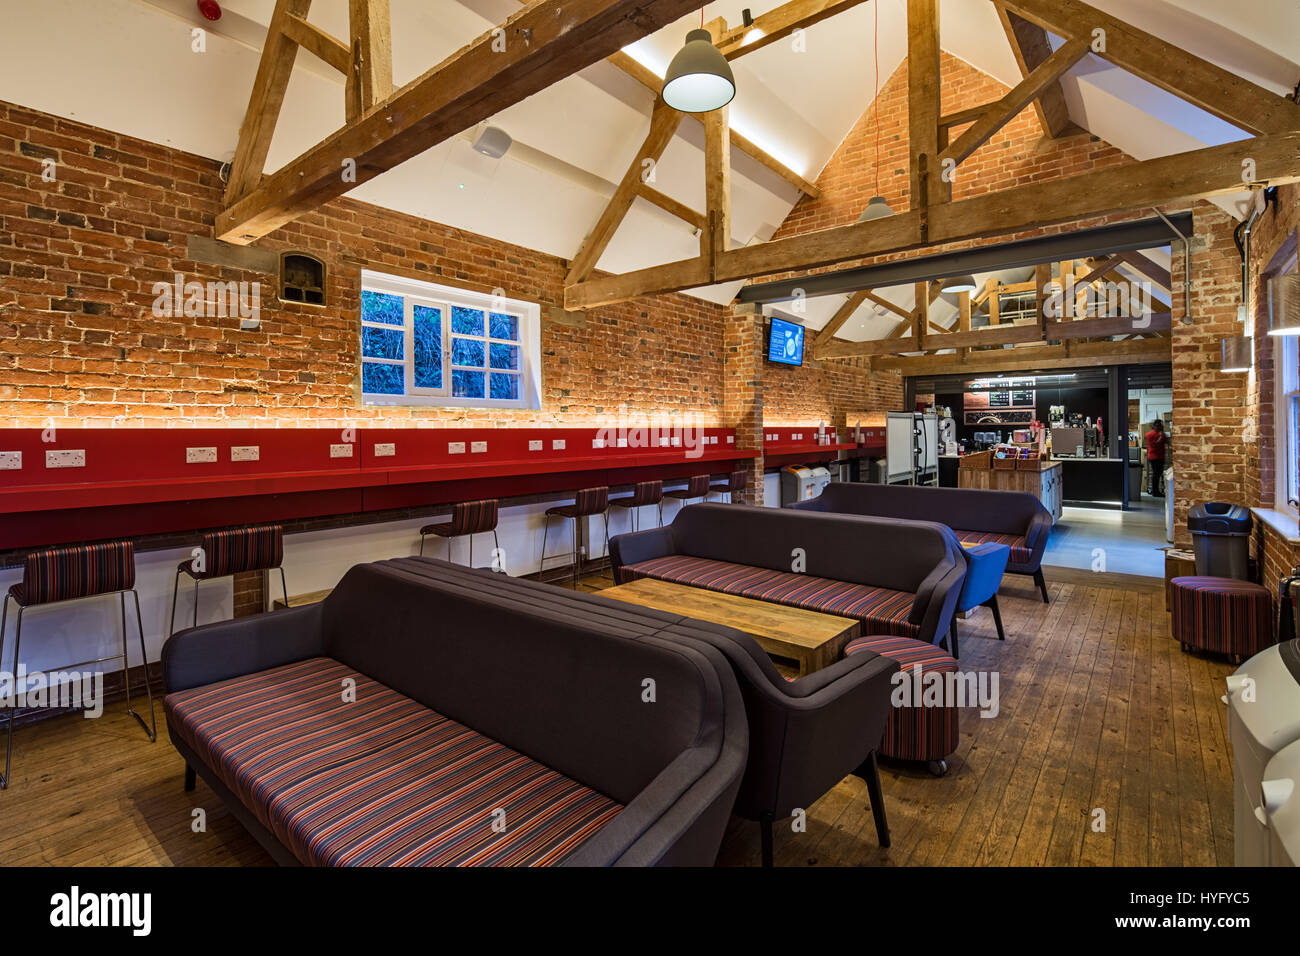 Boilerhouse Cafe at the Royal Holloway University of London. Stock Photo